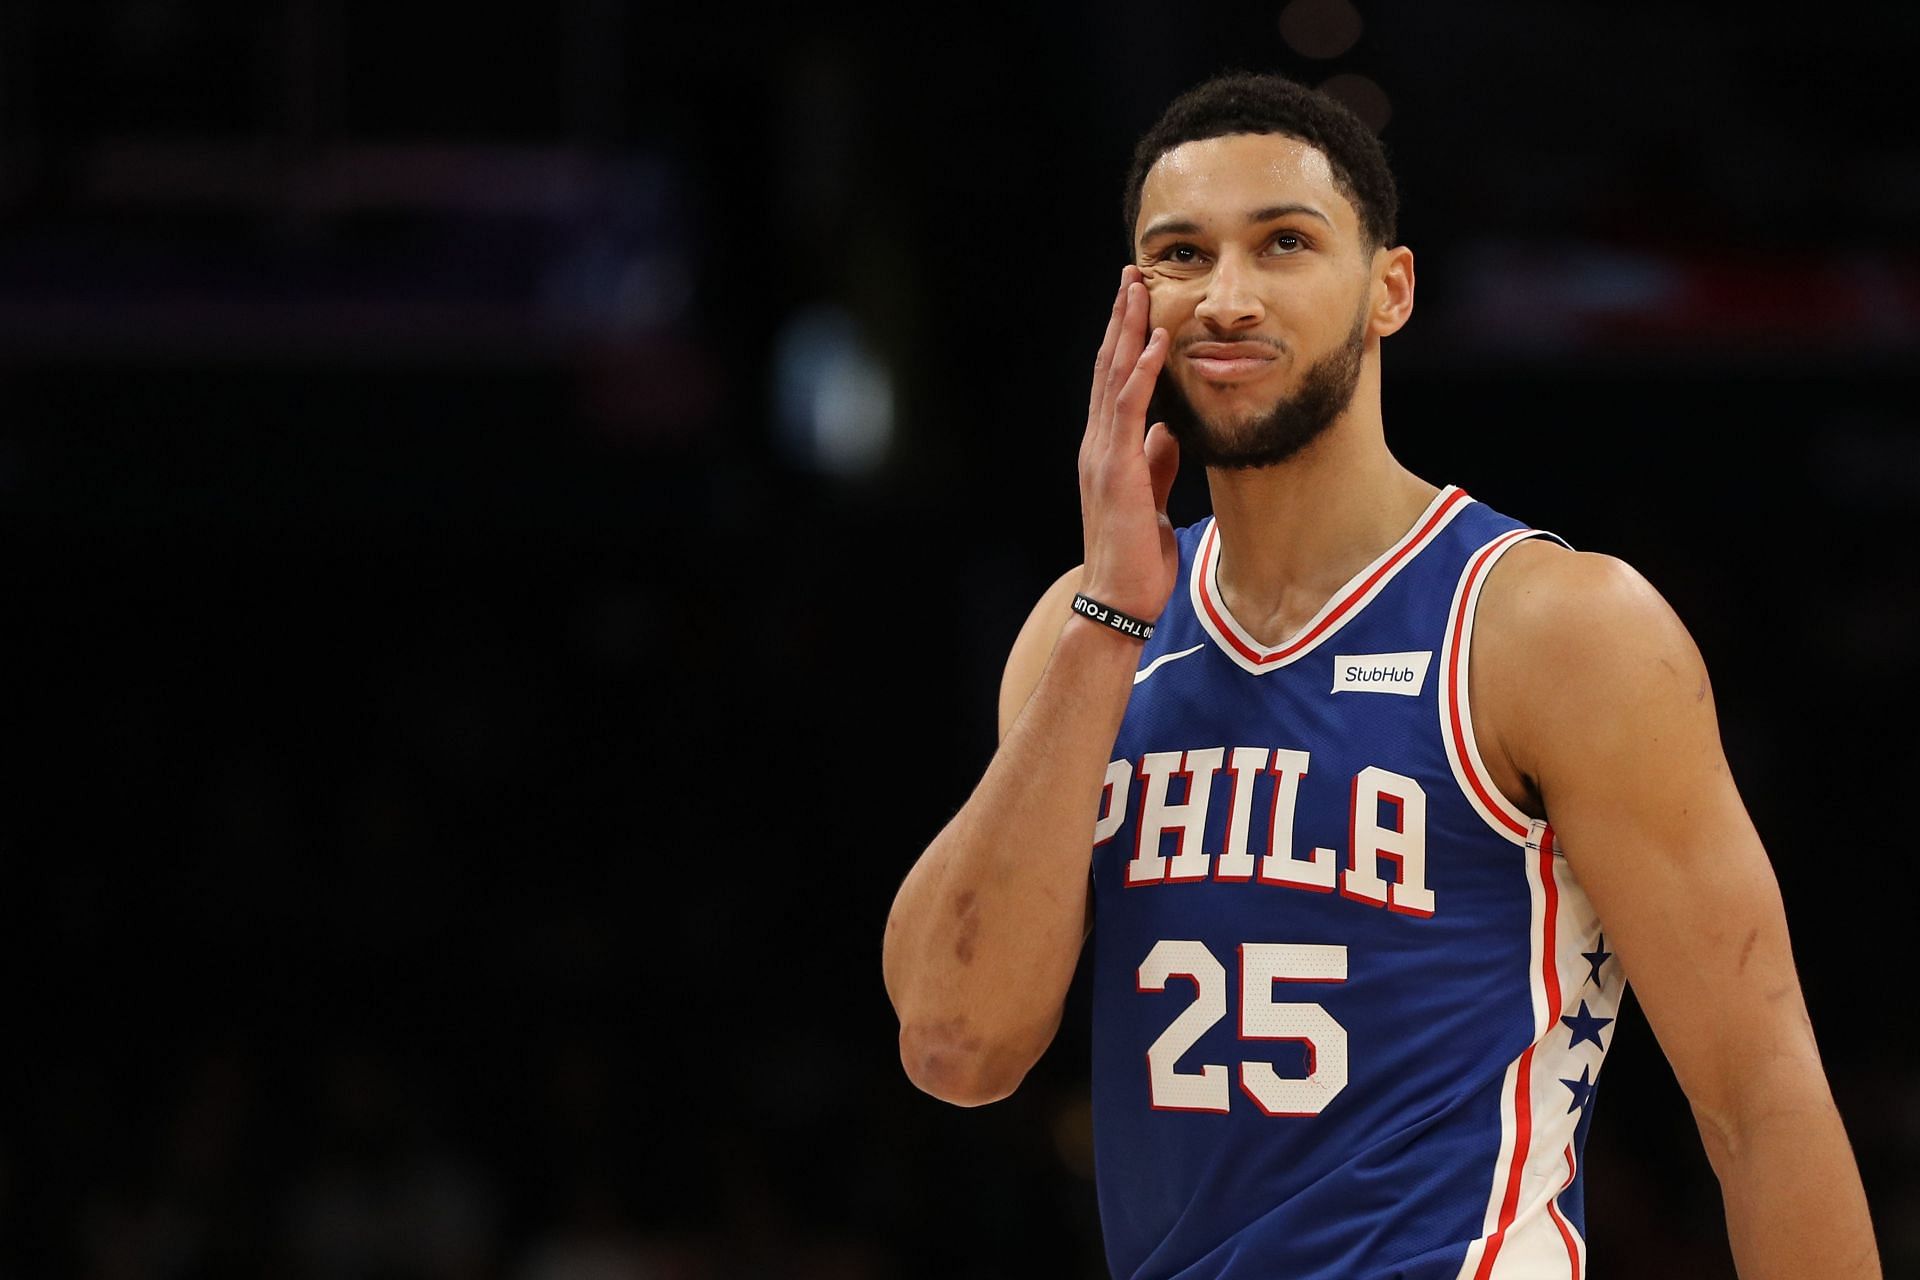 Disgruntled Philadelphia 76ers guard Ben Simmons has yet to play a game this season.